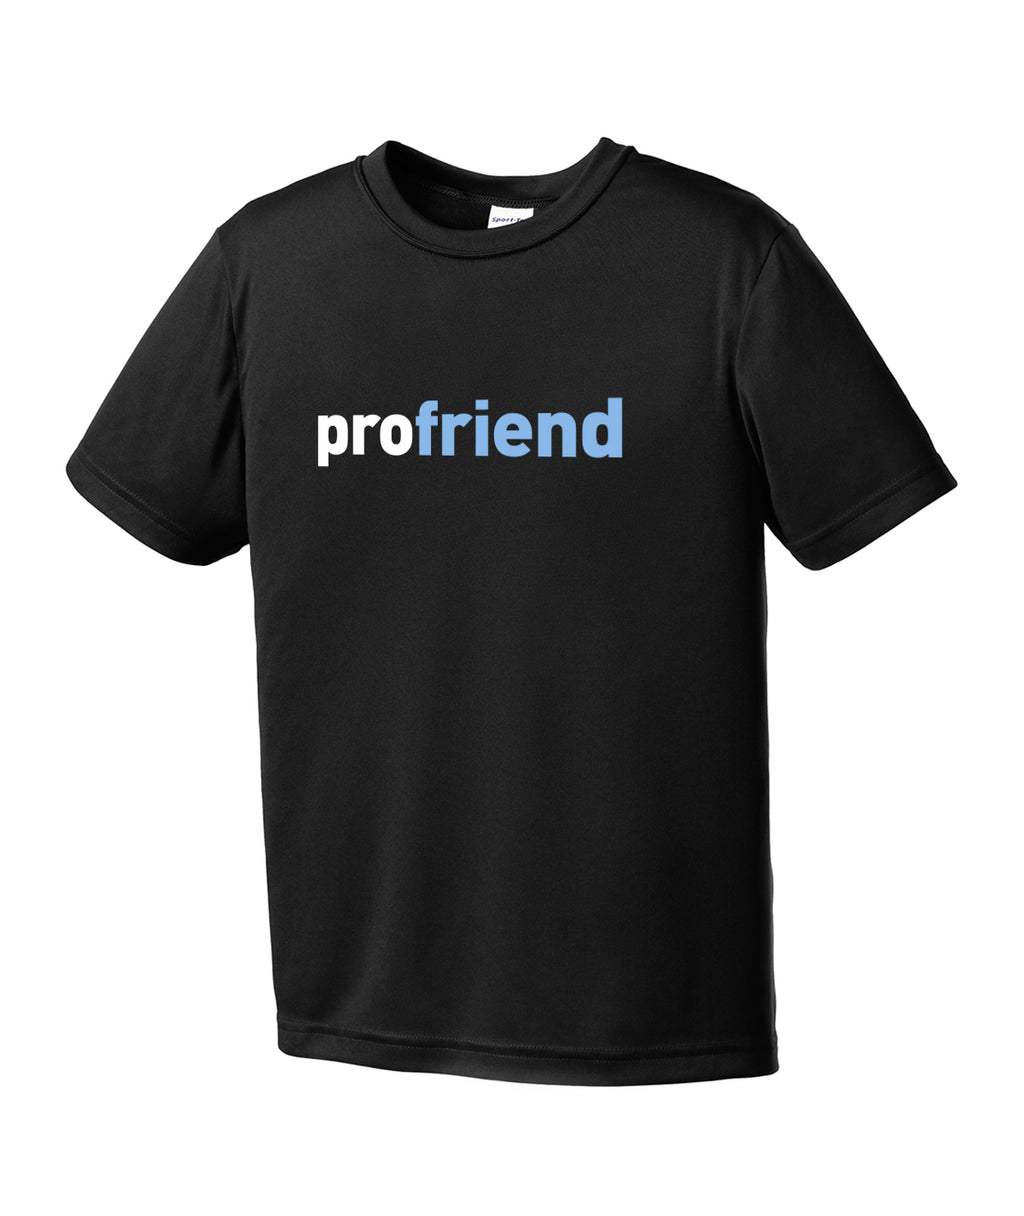 Profriend Youth Performance Tee